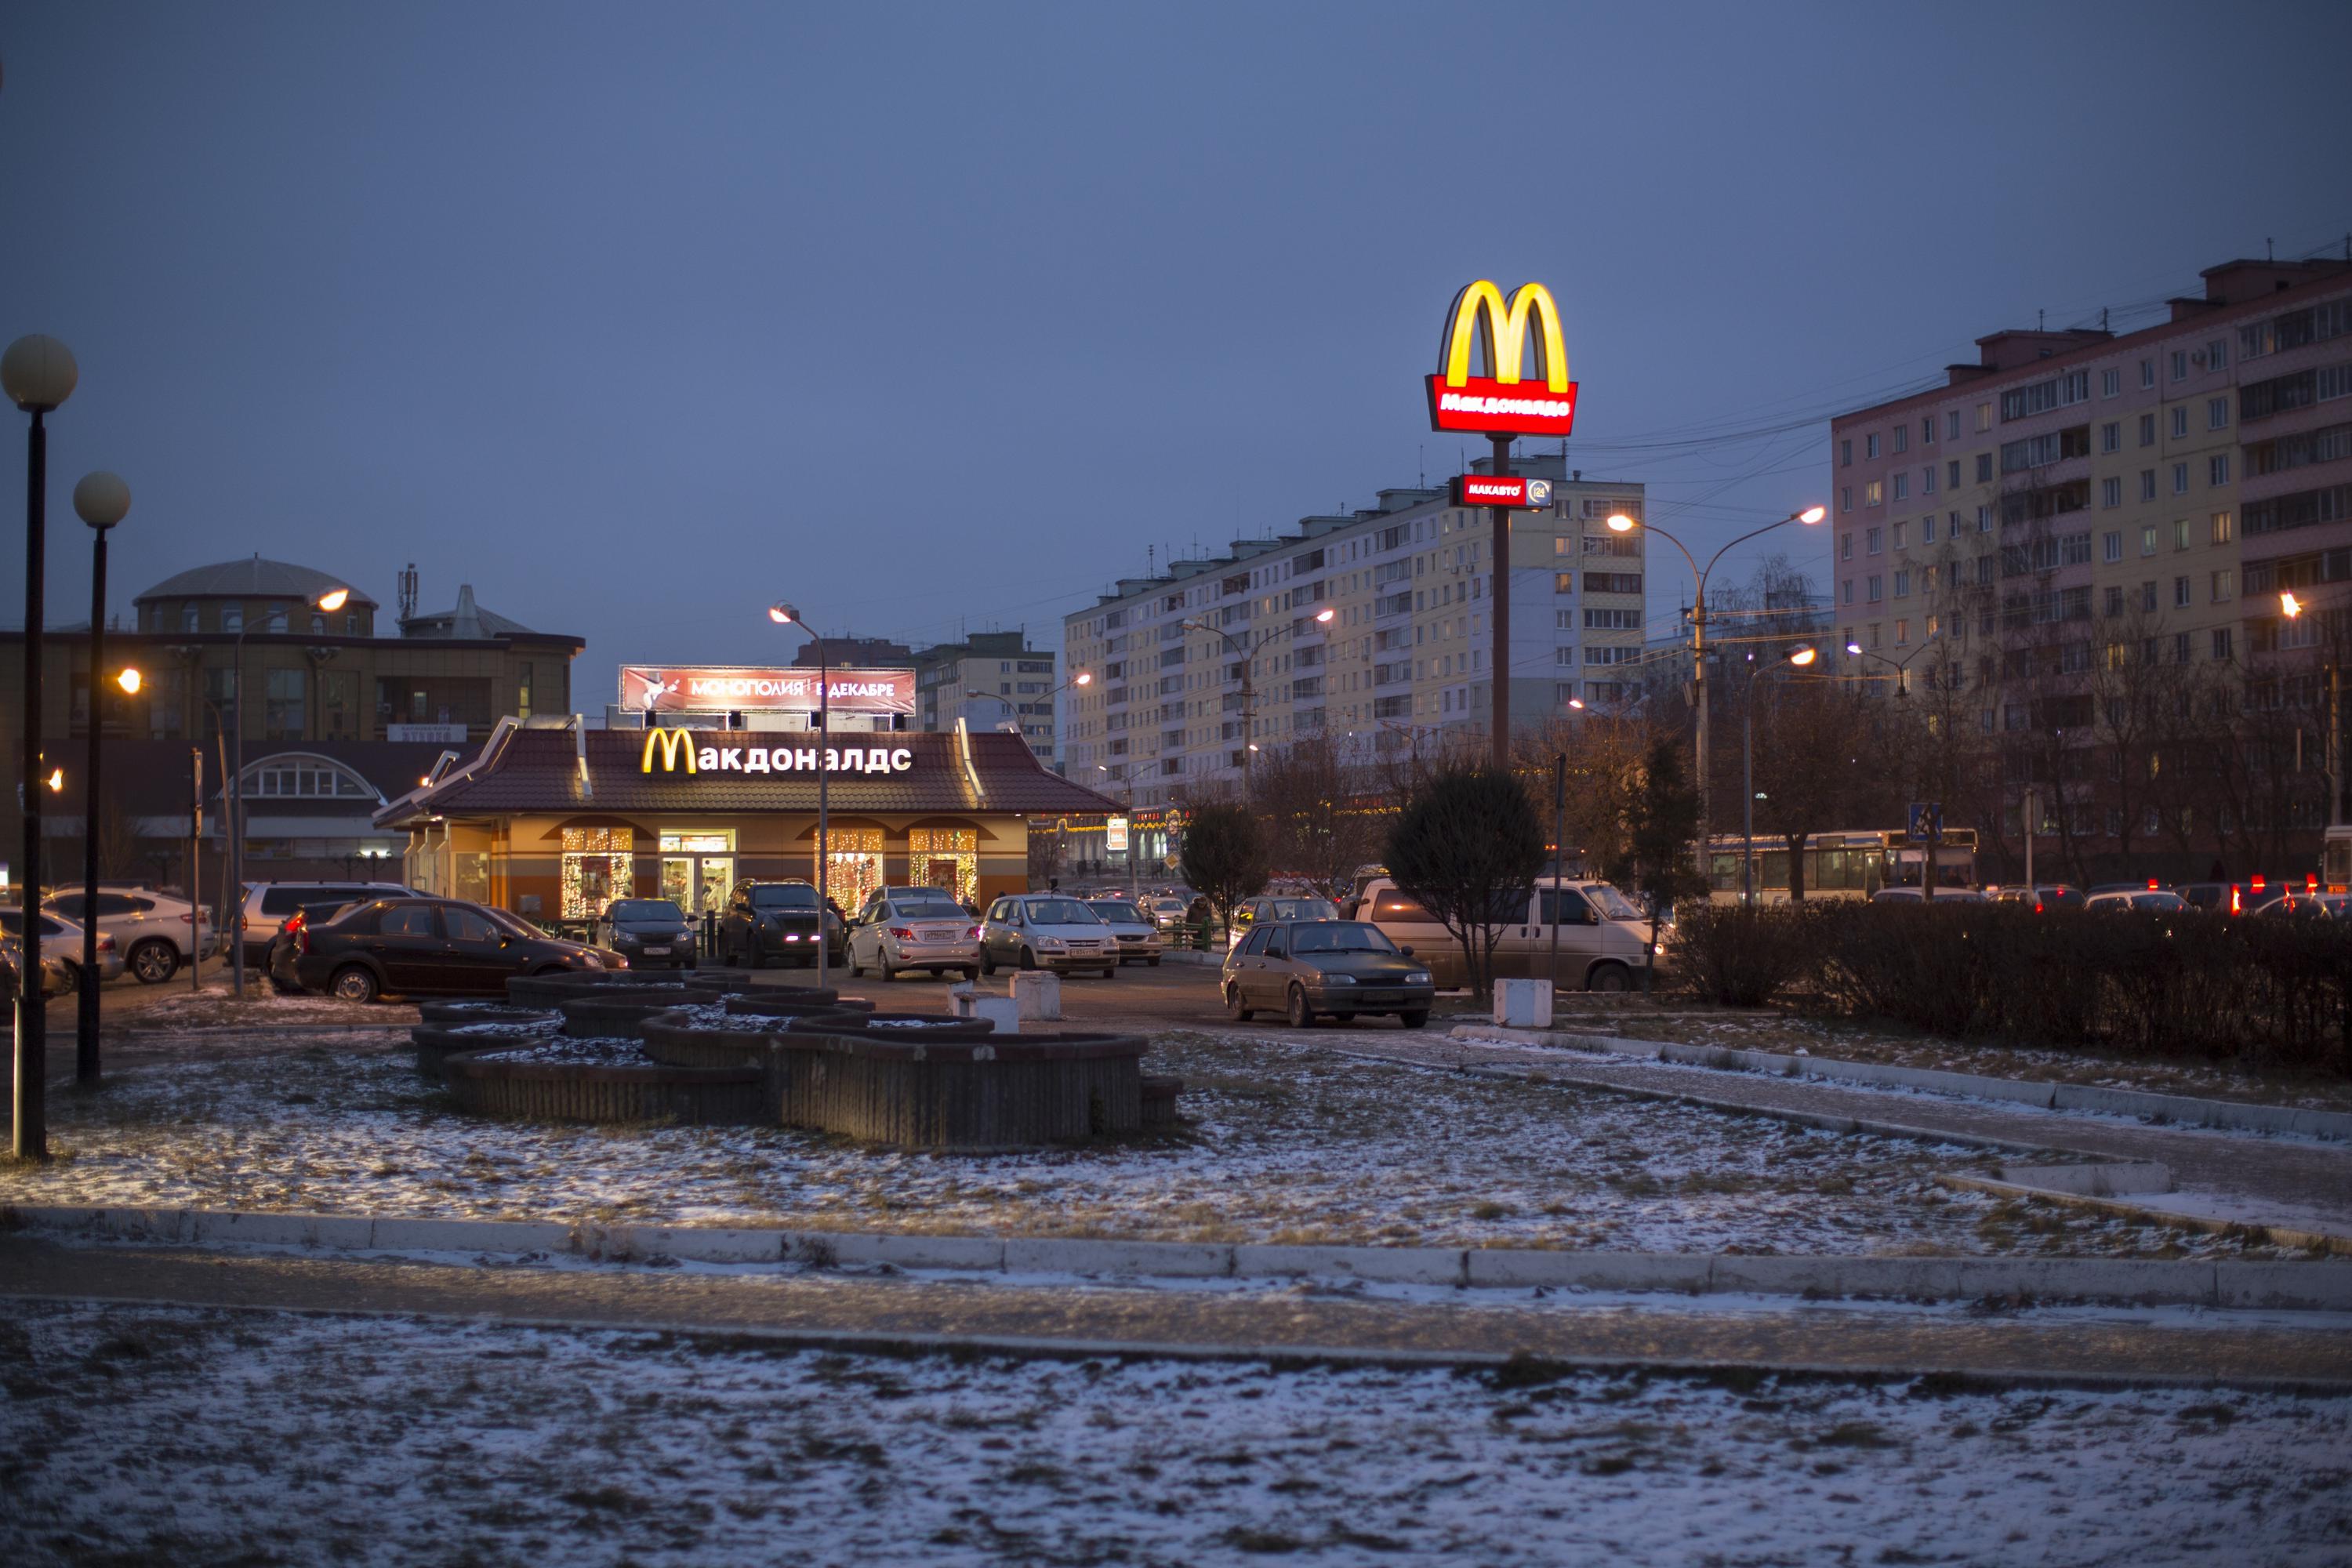 McDonald's to sell its Russian business, try to keep workers